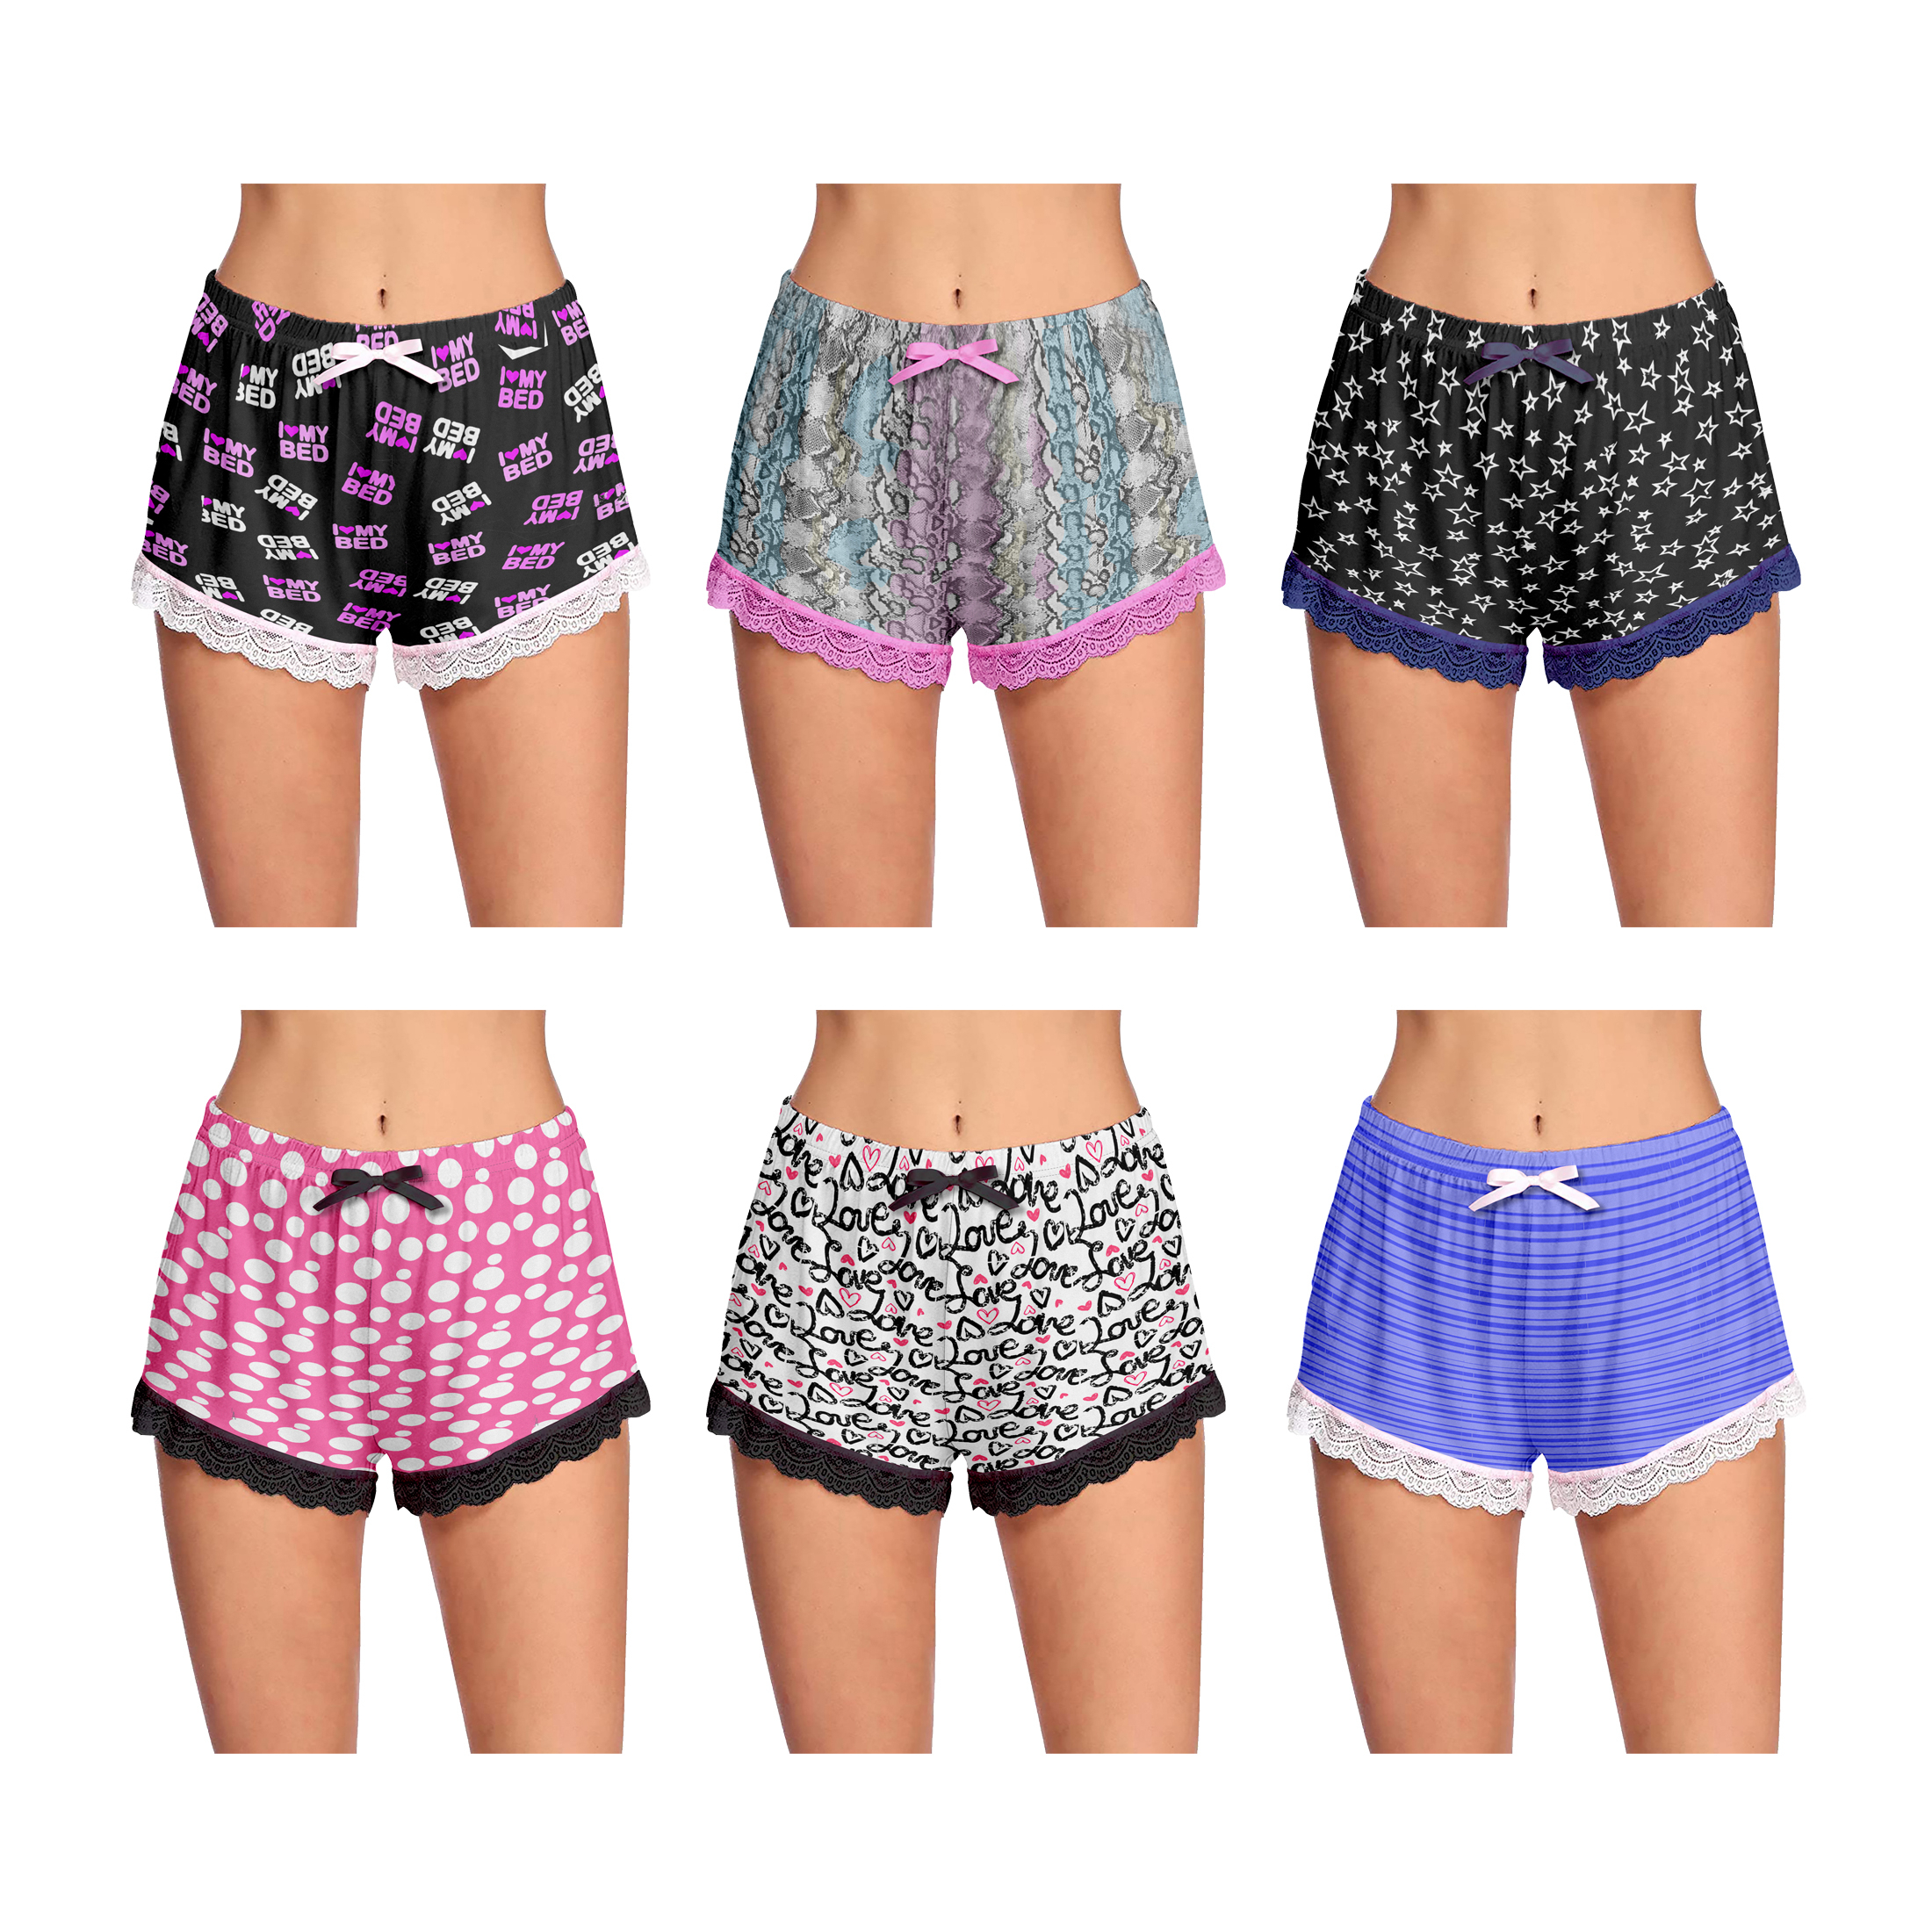 6-Pack Women's Casual Pajama Shorts Stretchy Laced Hem Relaxed Fit Yoga Printed Ladies Bottom - XL